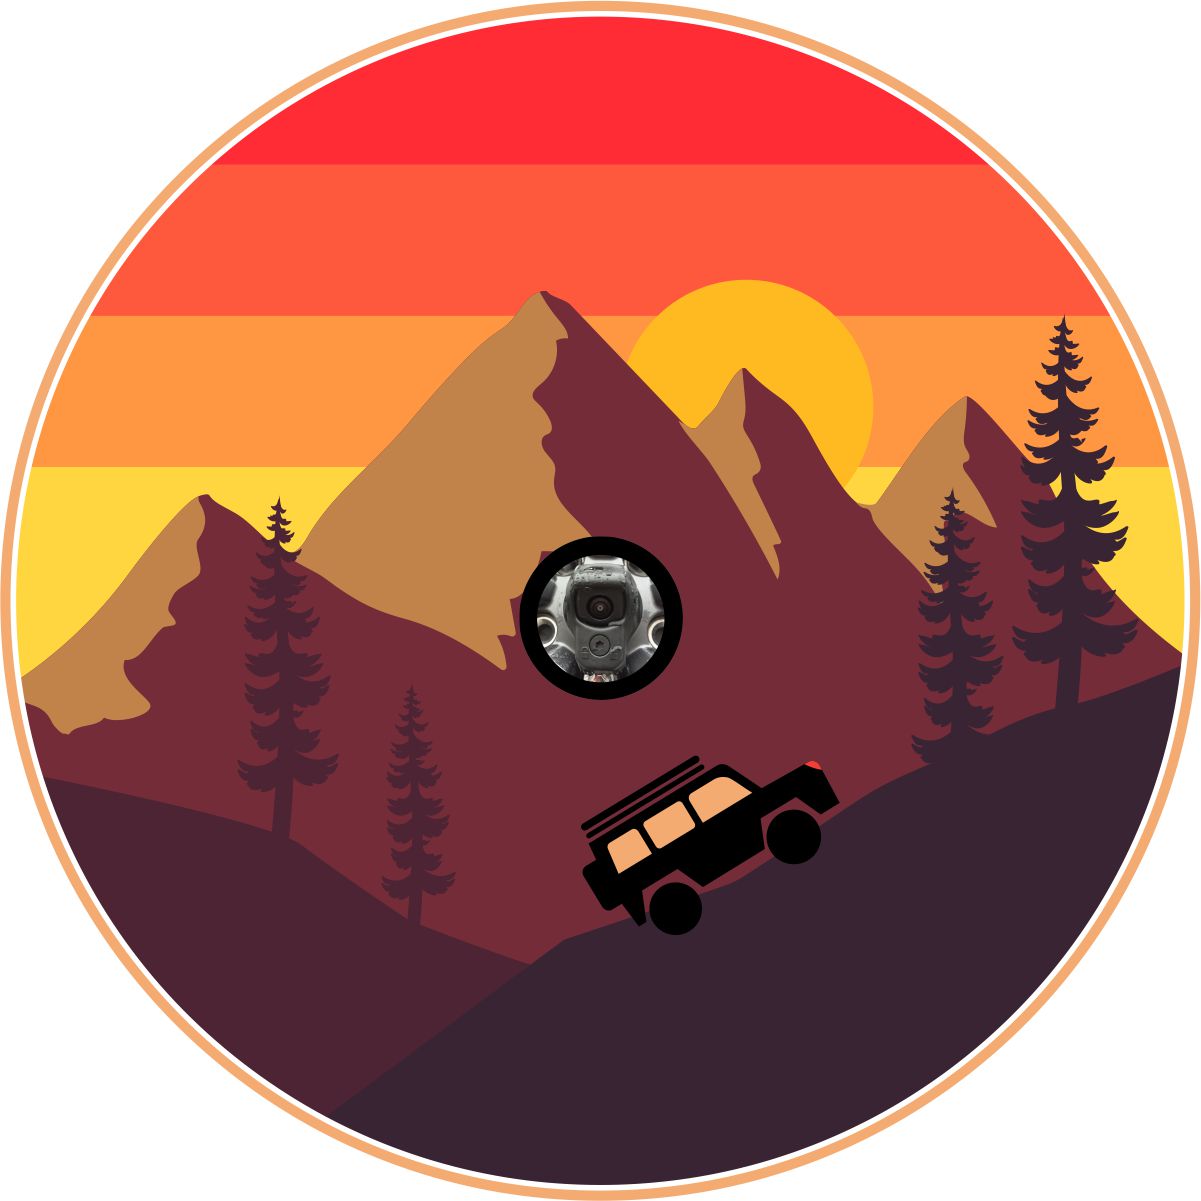 Vintage designed spare tire cover with camera hole for Jeep, RV, trailers, campers, CR-V, FJ Cruiser, Bronco, and more. An SUV off-road in the mountains with an ombre sunset background.